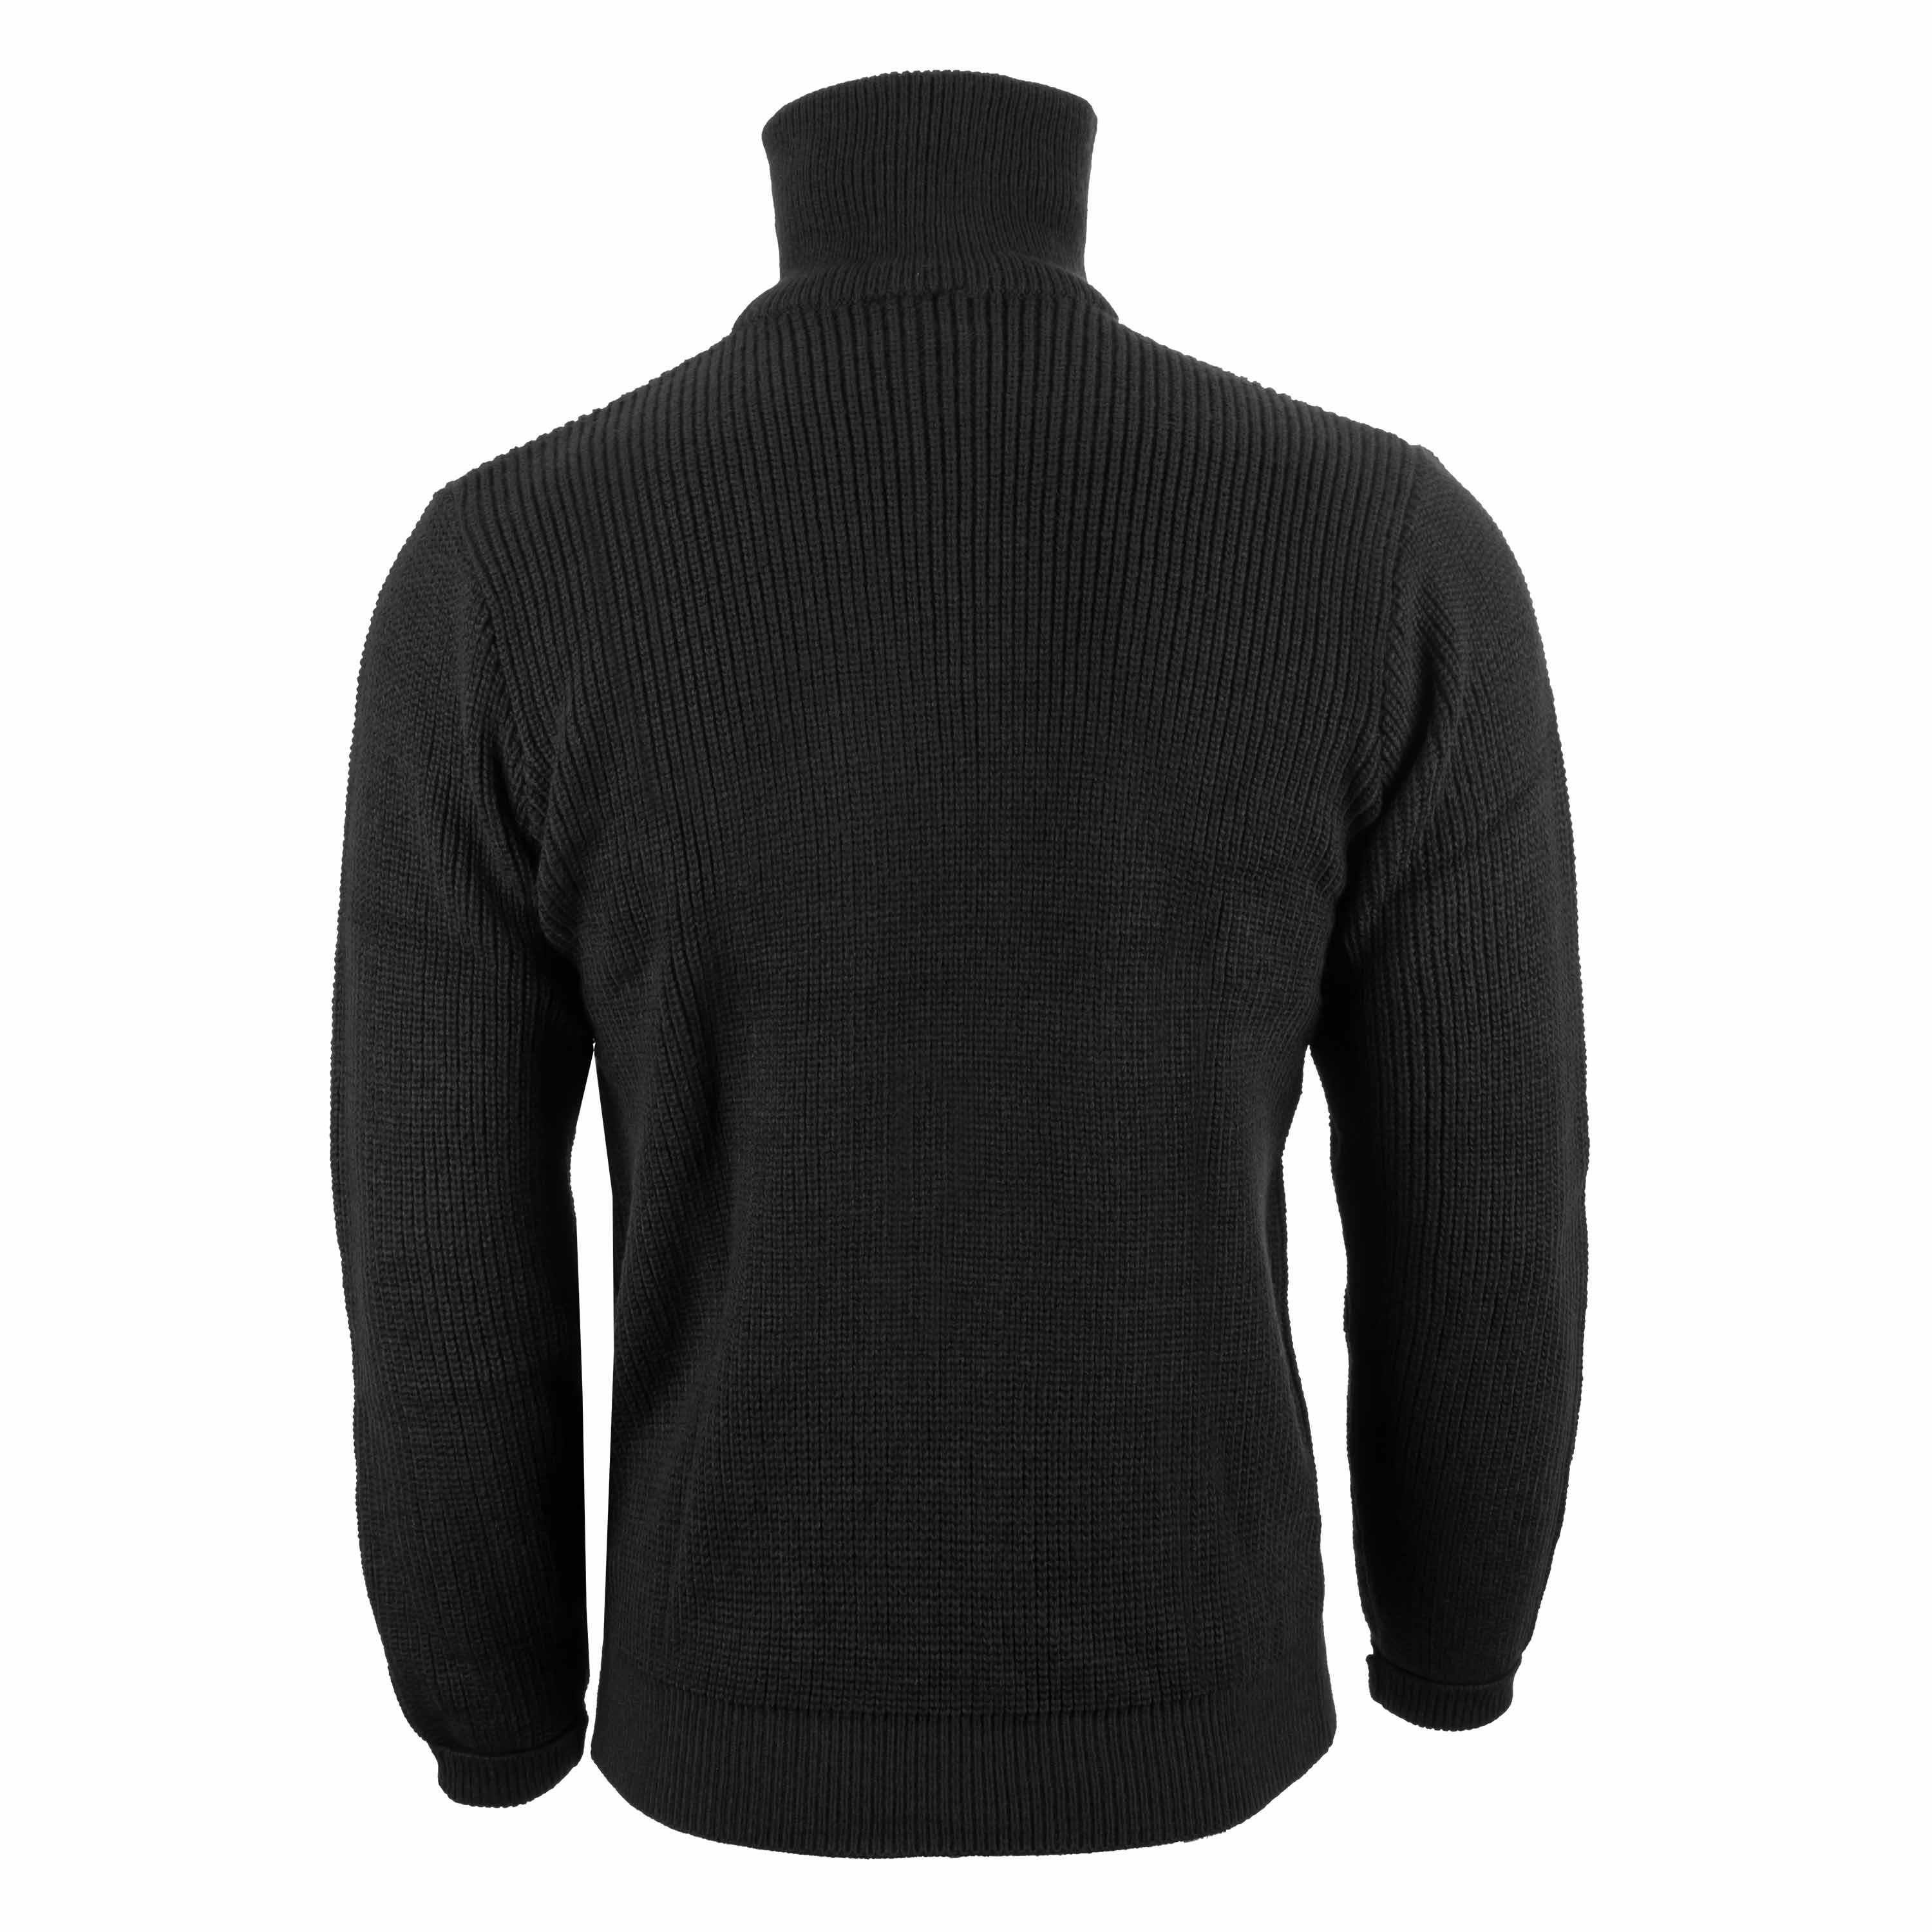 Purchase the Sweater Troyer 750 g black by ASMC